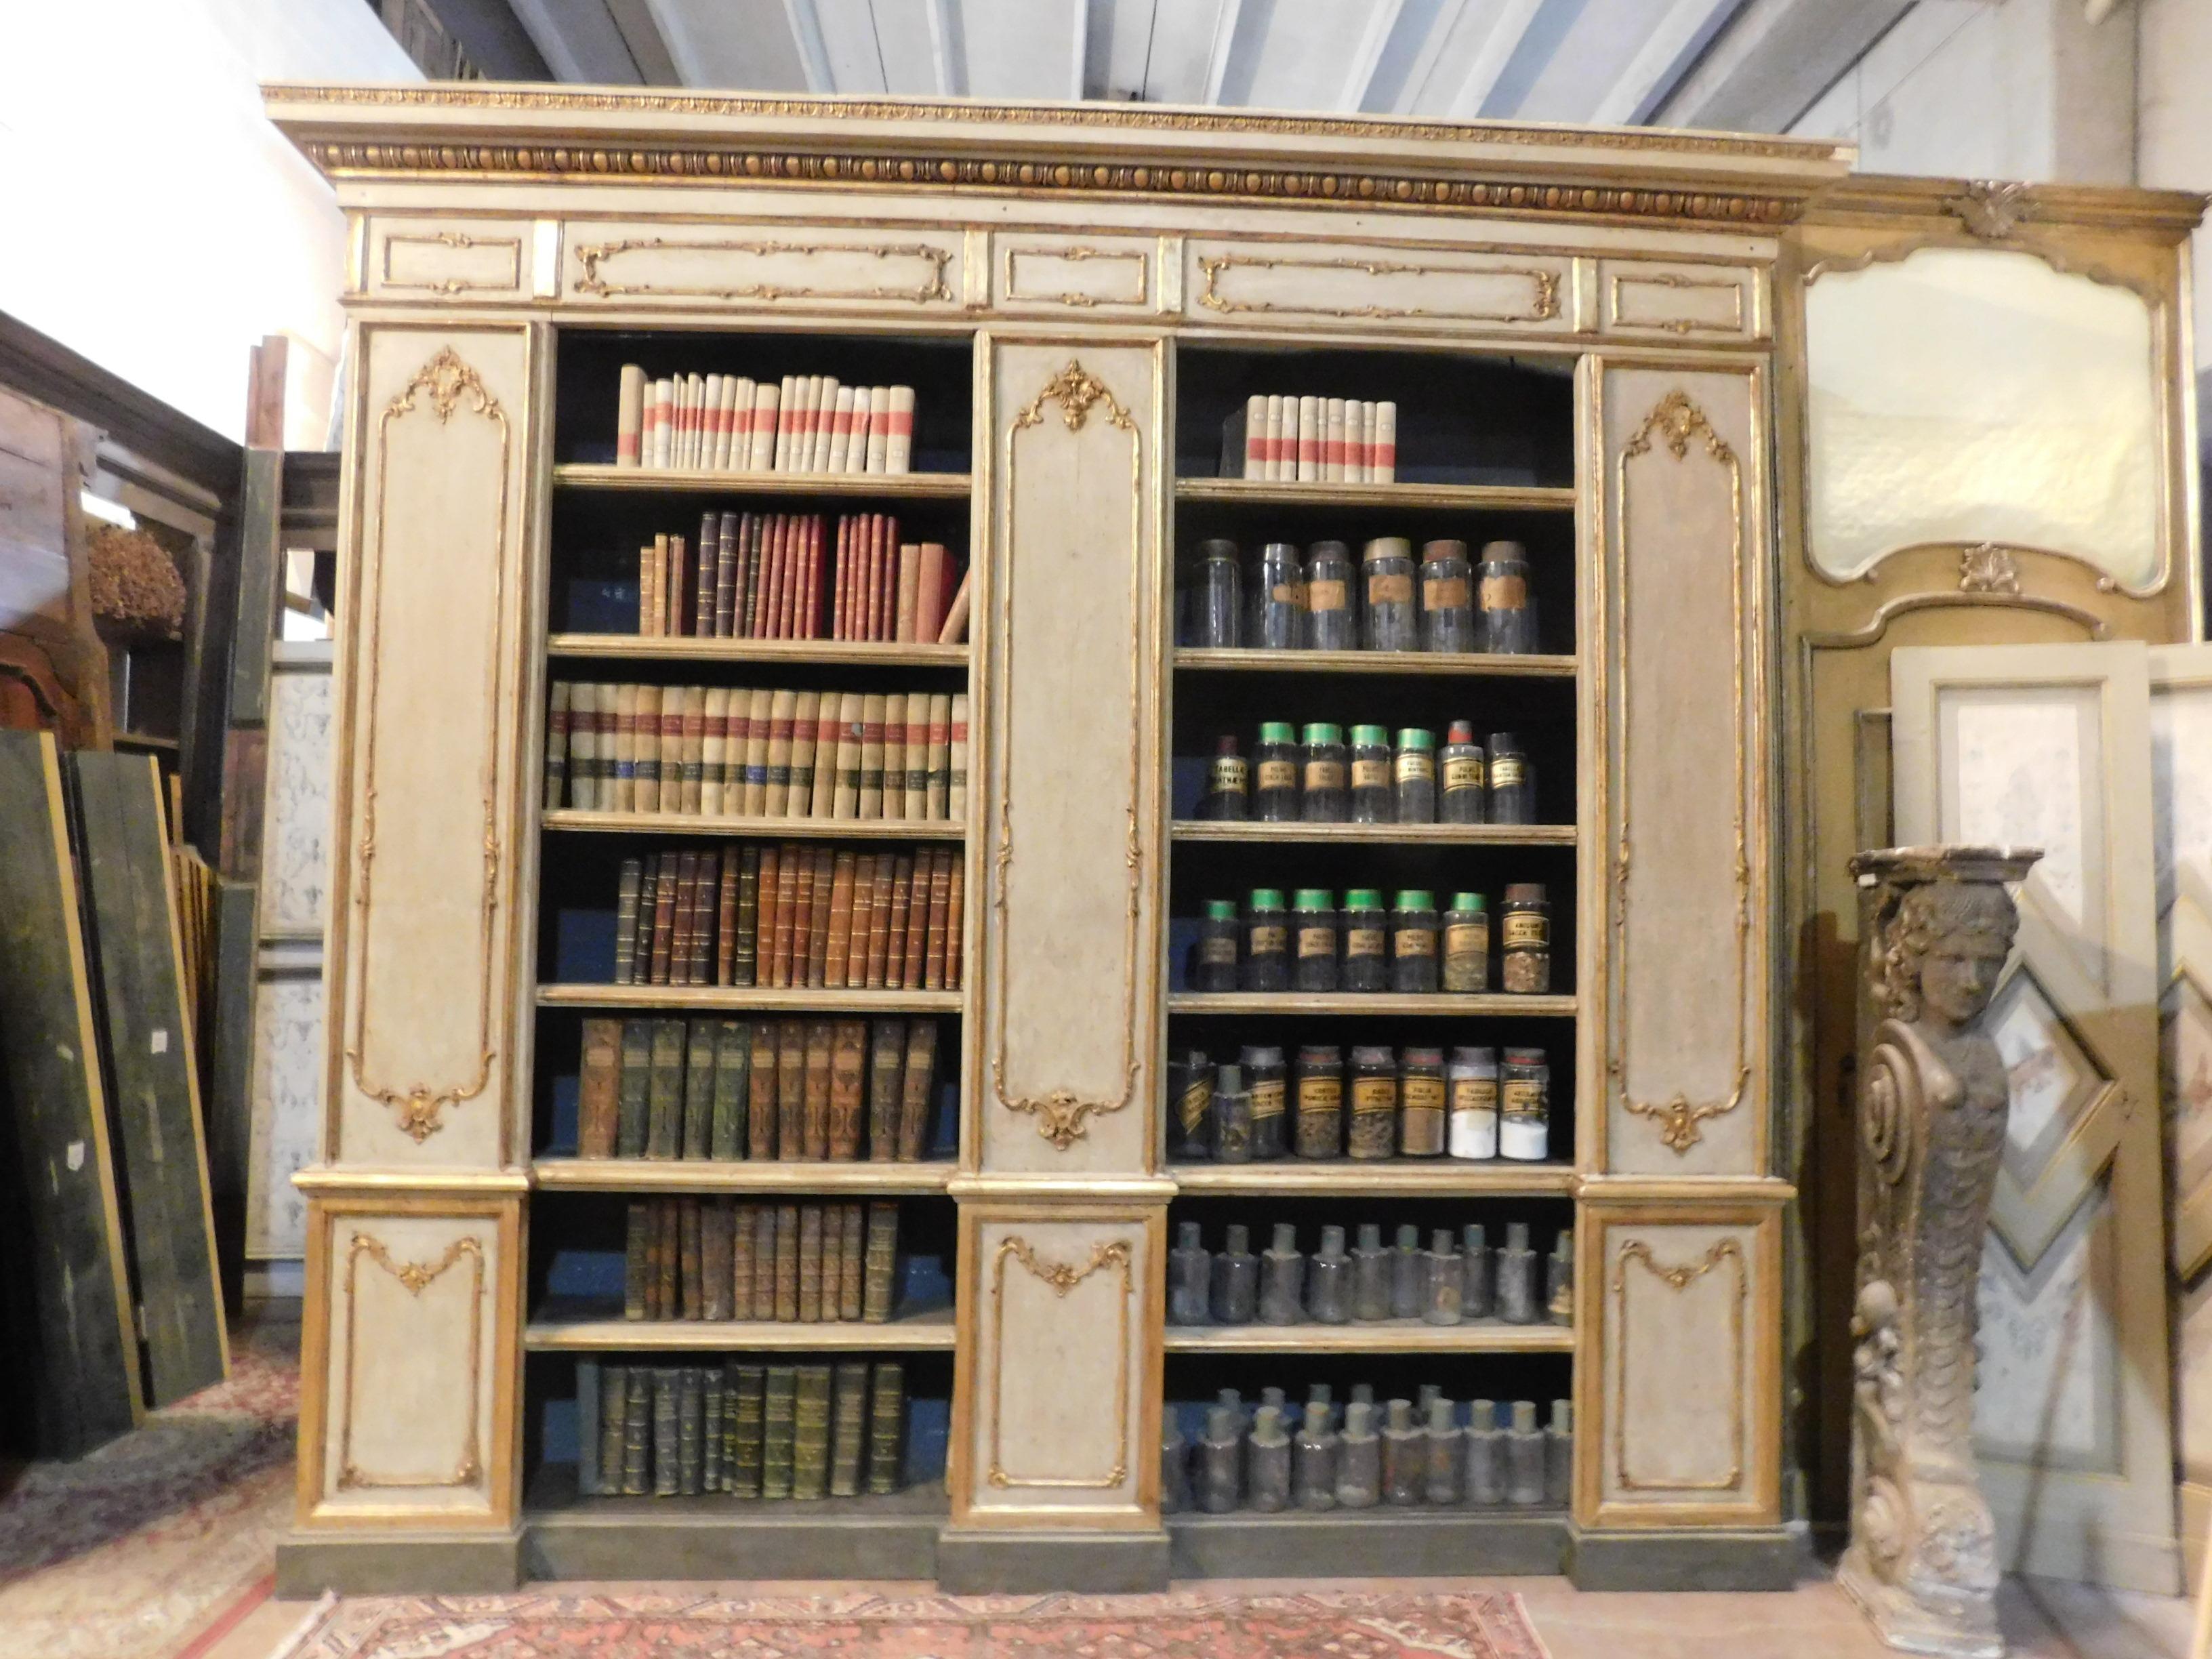 Ancient large lacquered and gilded bookcase, hand-carved with columns and rich gilded friezes, built entirely by hand in the middle of the 19th century for an important building in northern Italy (from Turin).
Of great visual impact and excellent